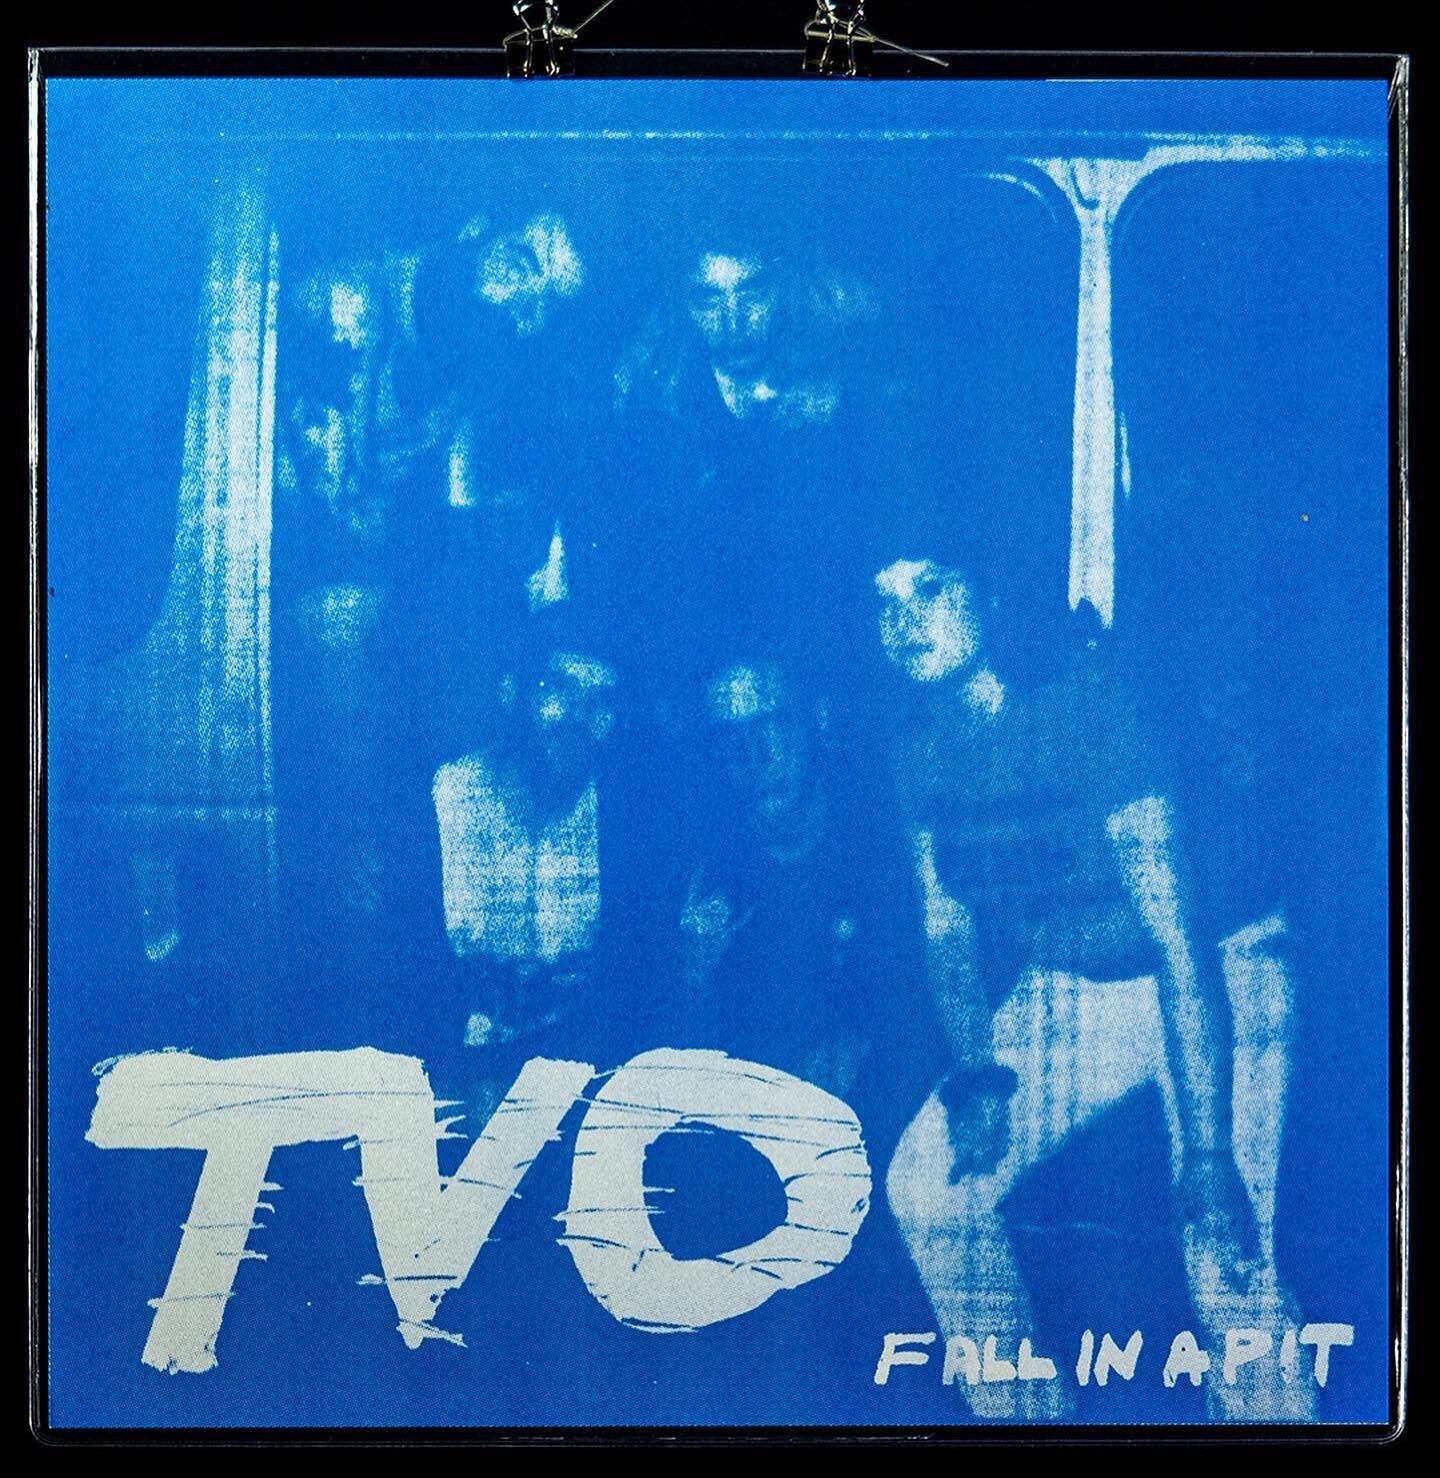 TVO - Fall in a Pit EP
Out July 13